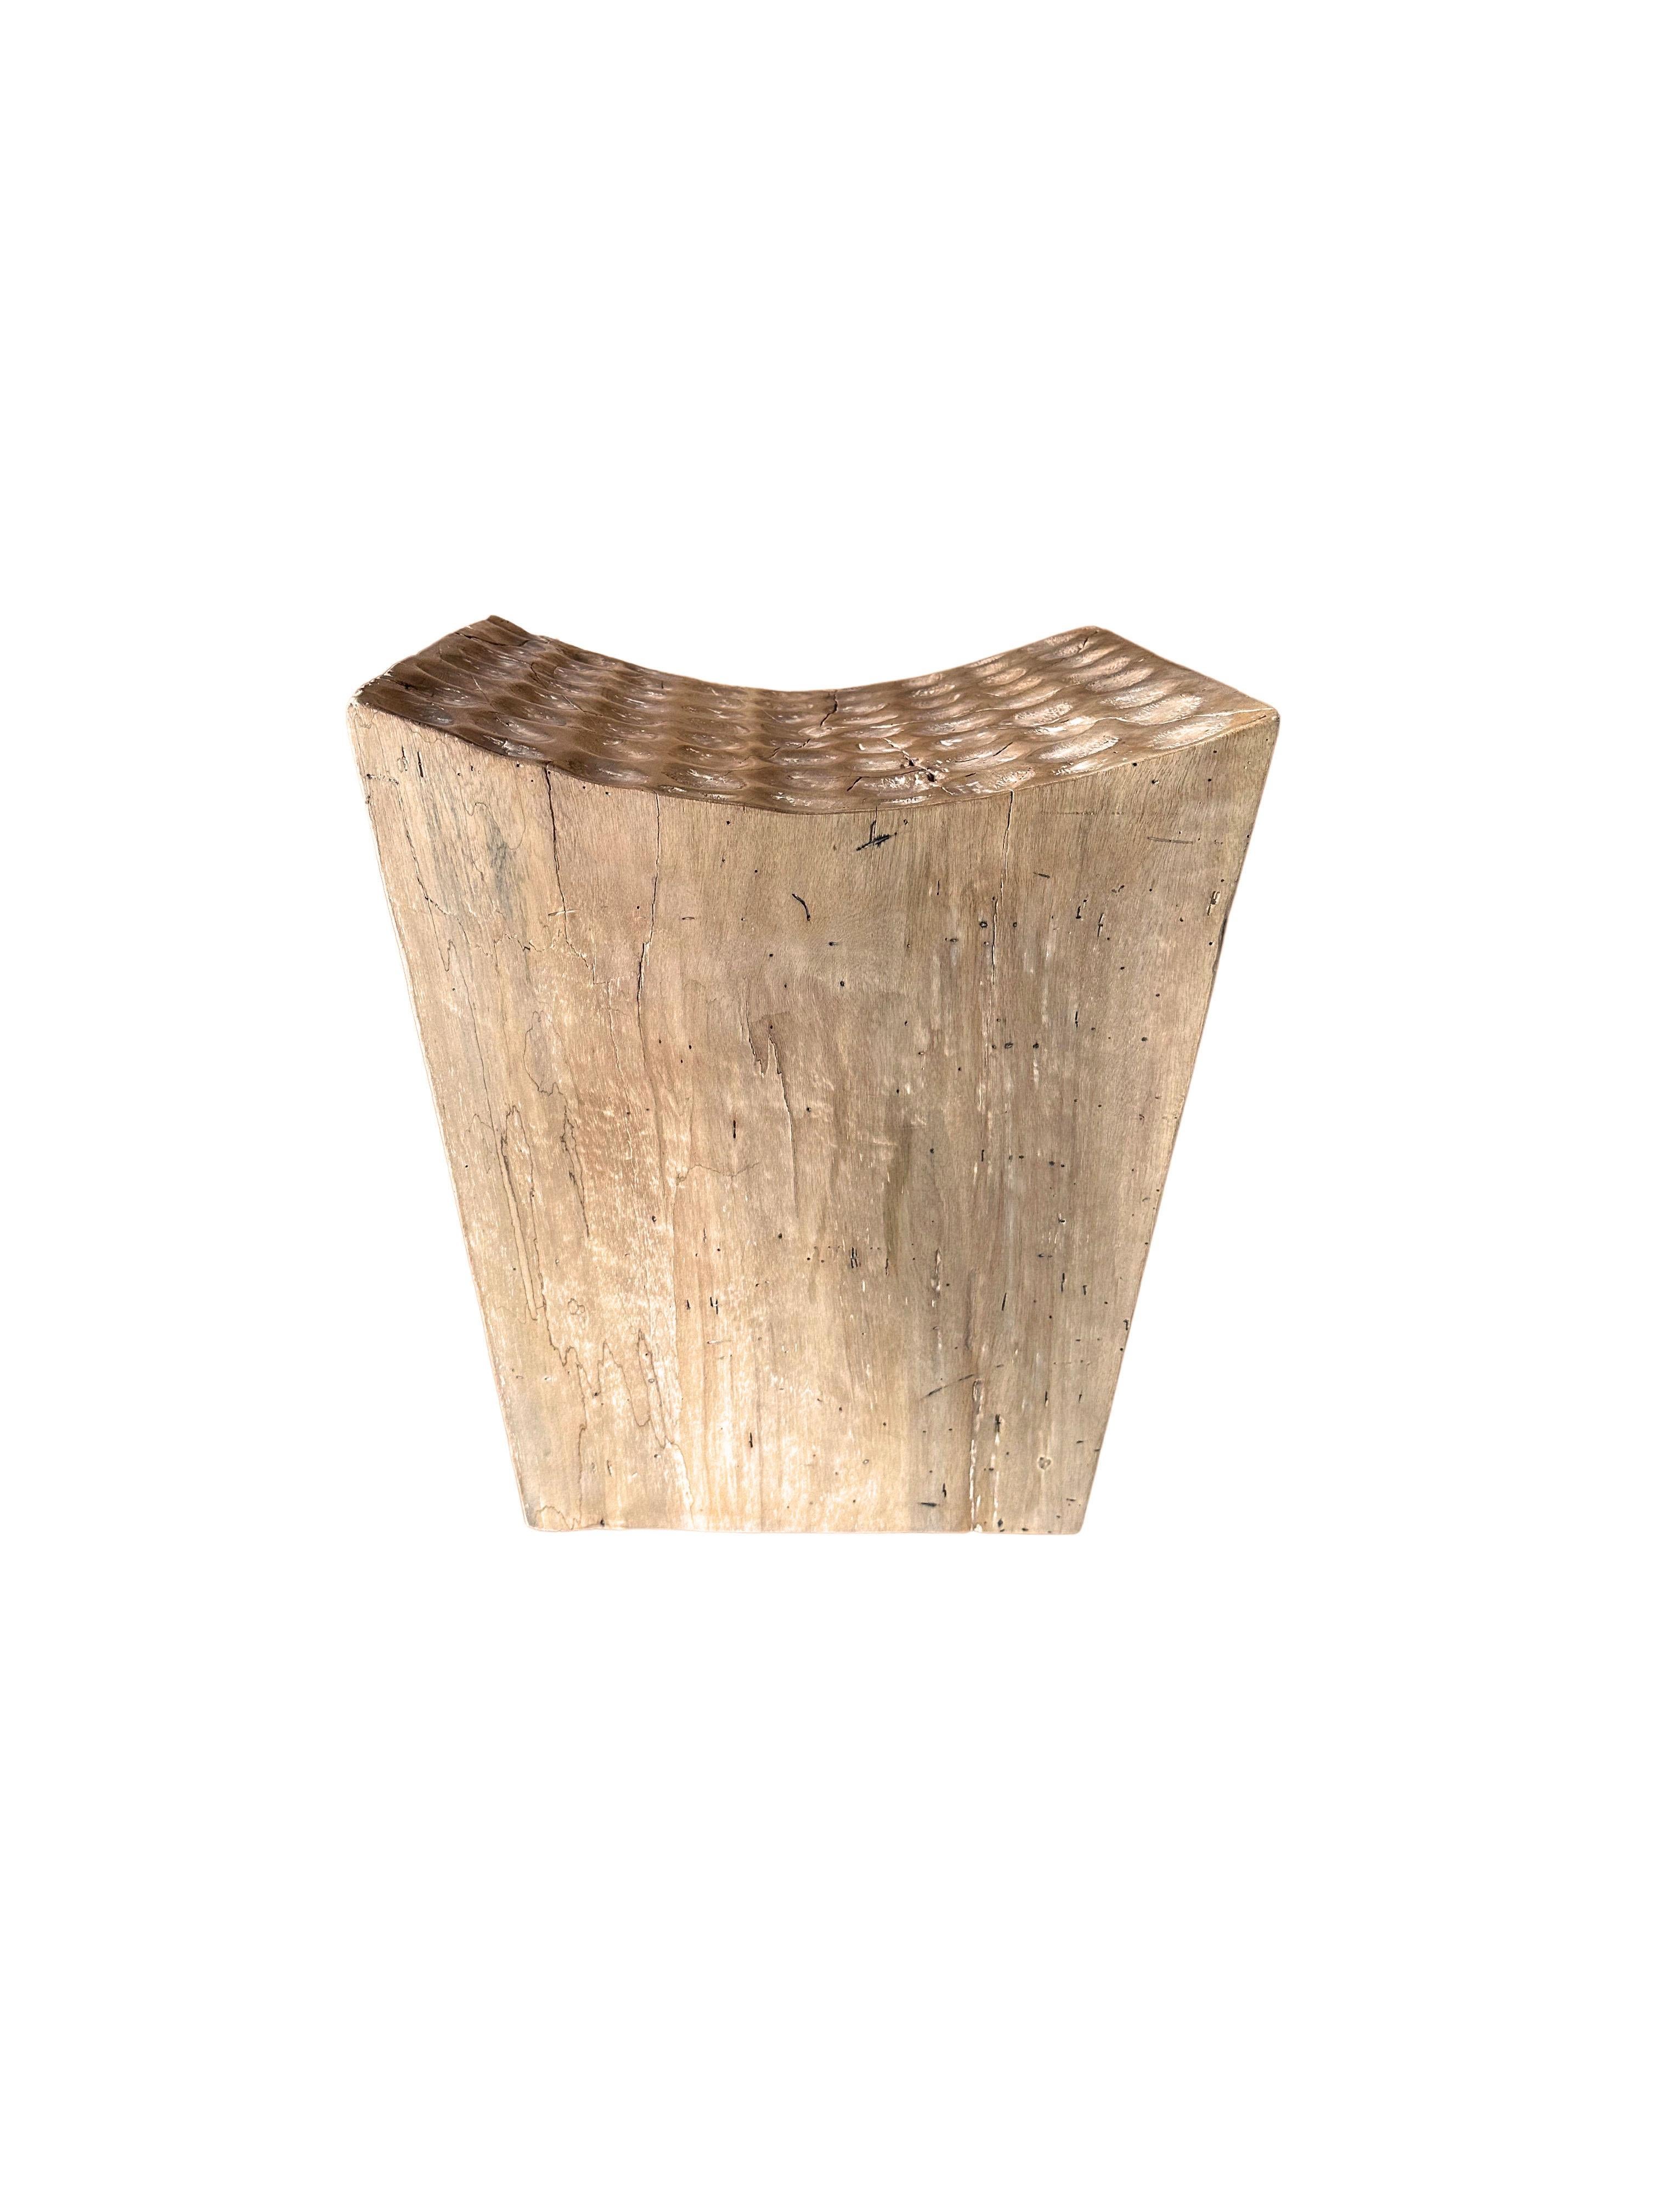 Contemporary Sculptural Stool Carved from Solid Mango Wood Modern Organic For Sale